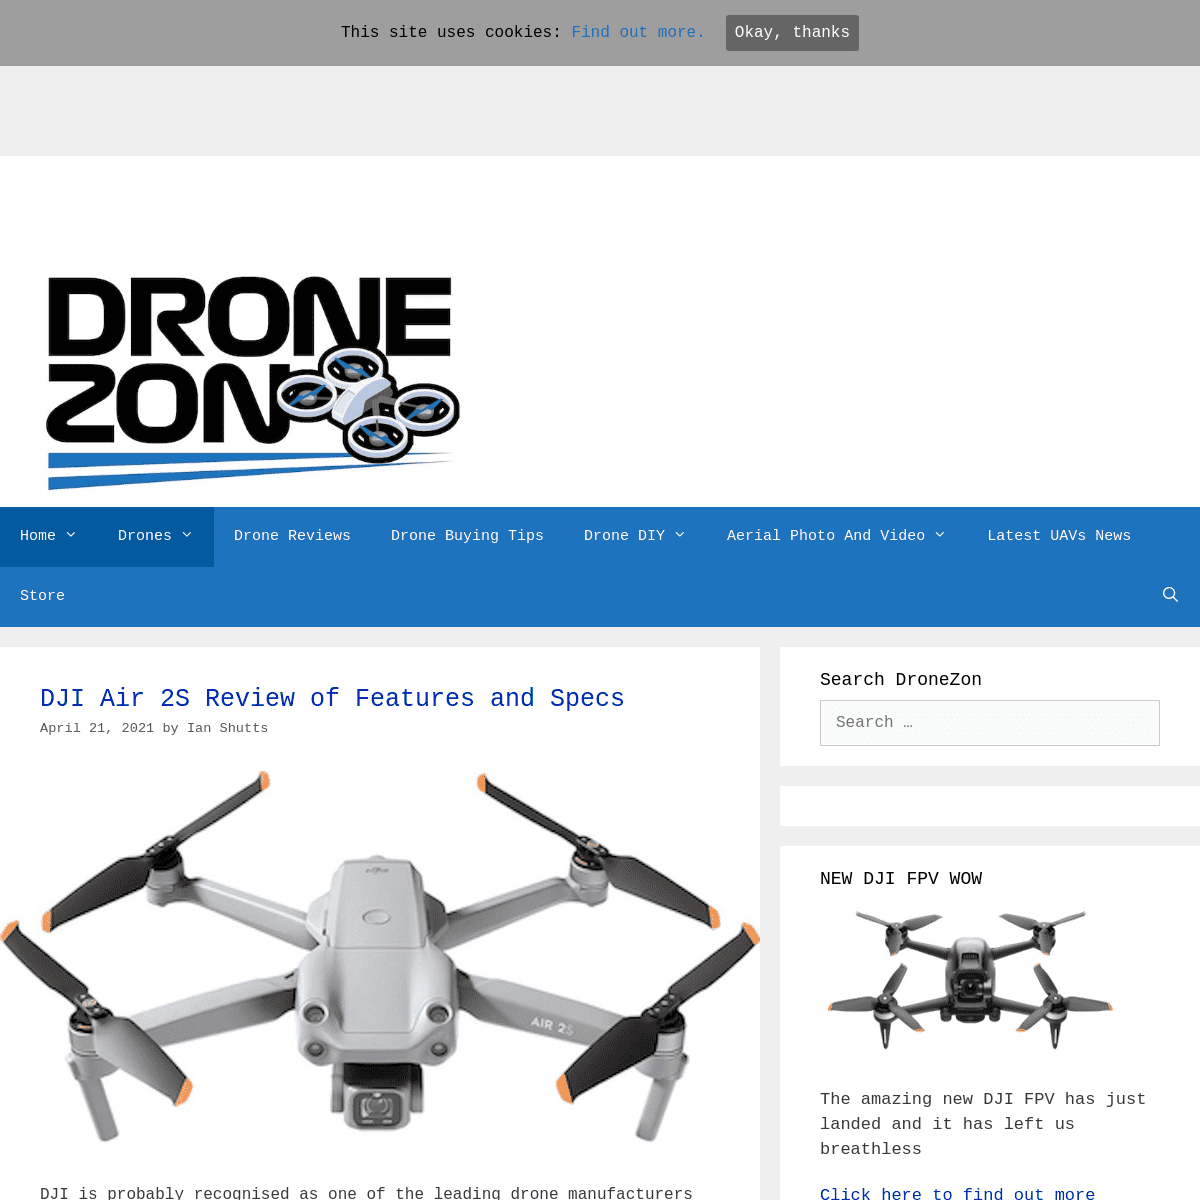 A complete backup of https://dronezon.com